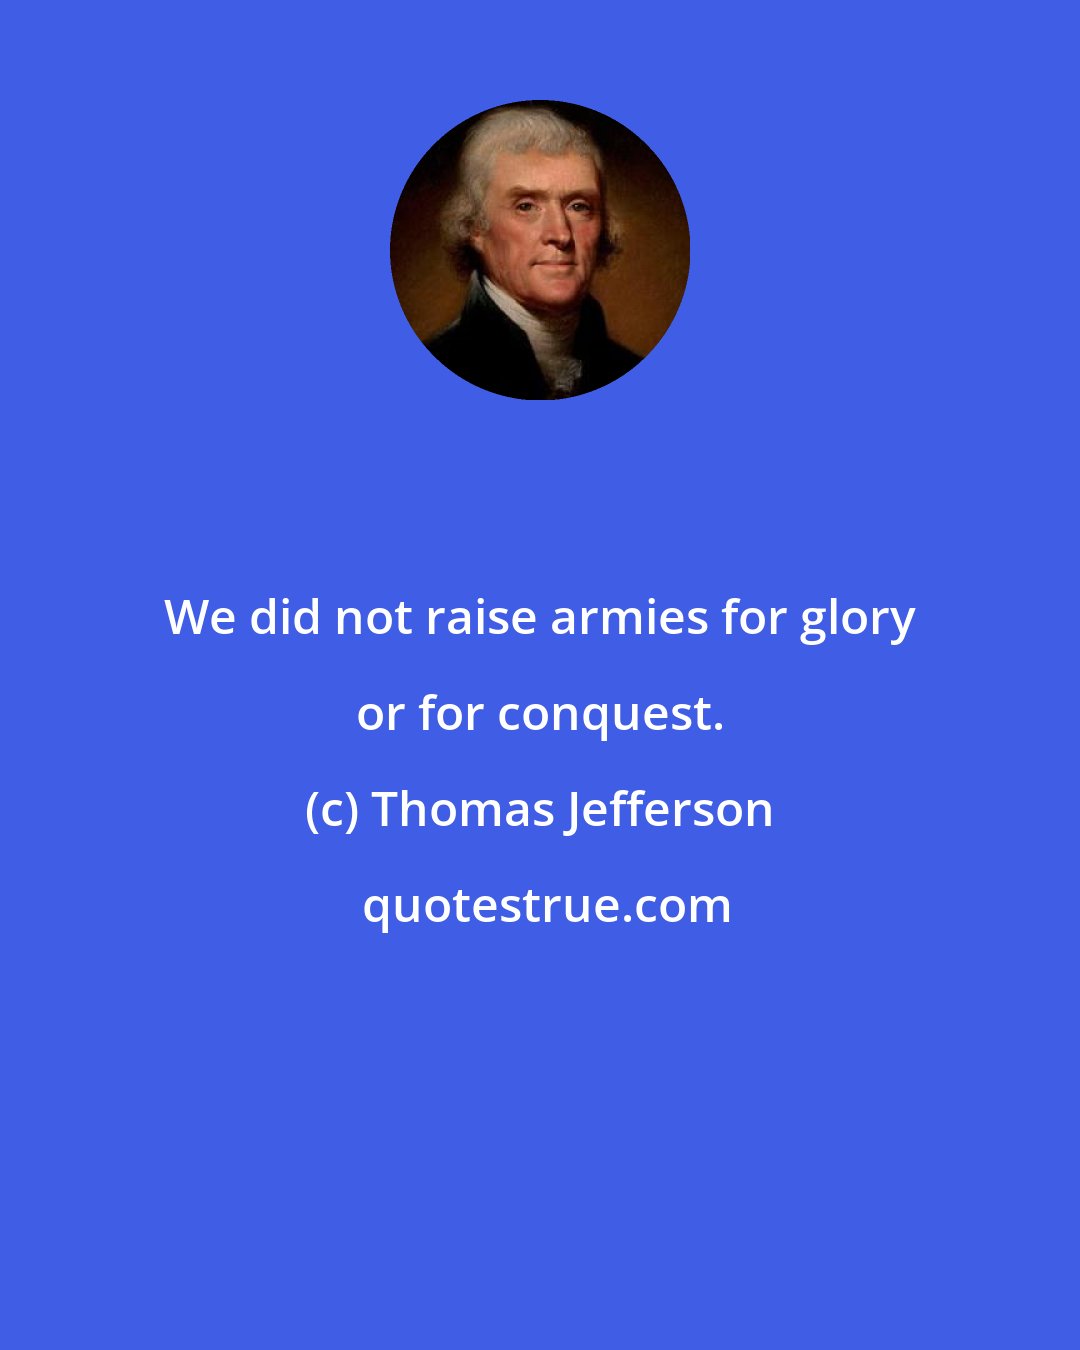 Thomas Jefferson: We did not raise armies for glory or for conquest.